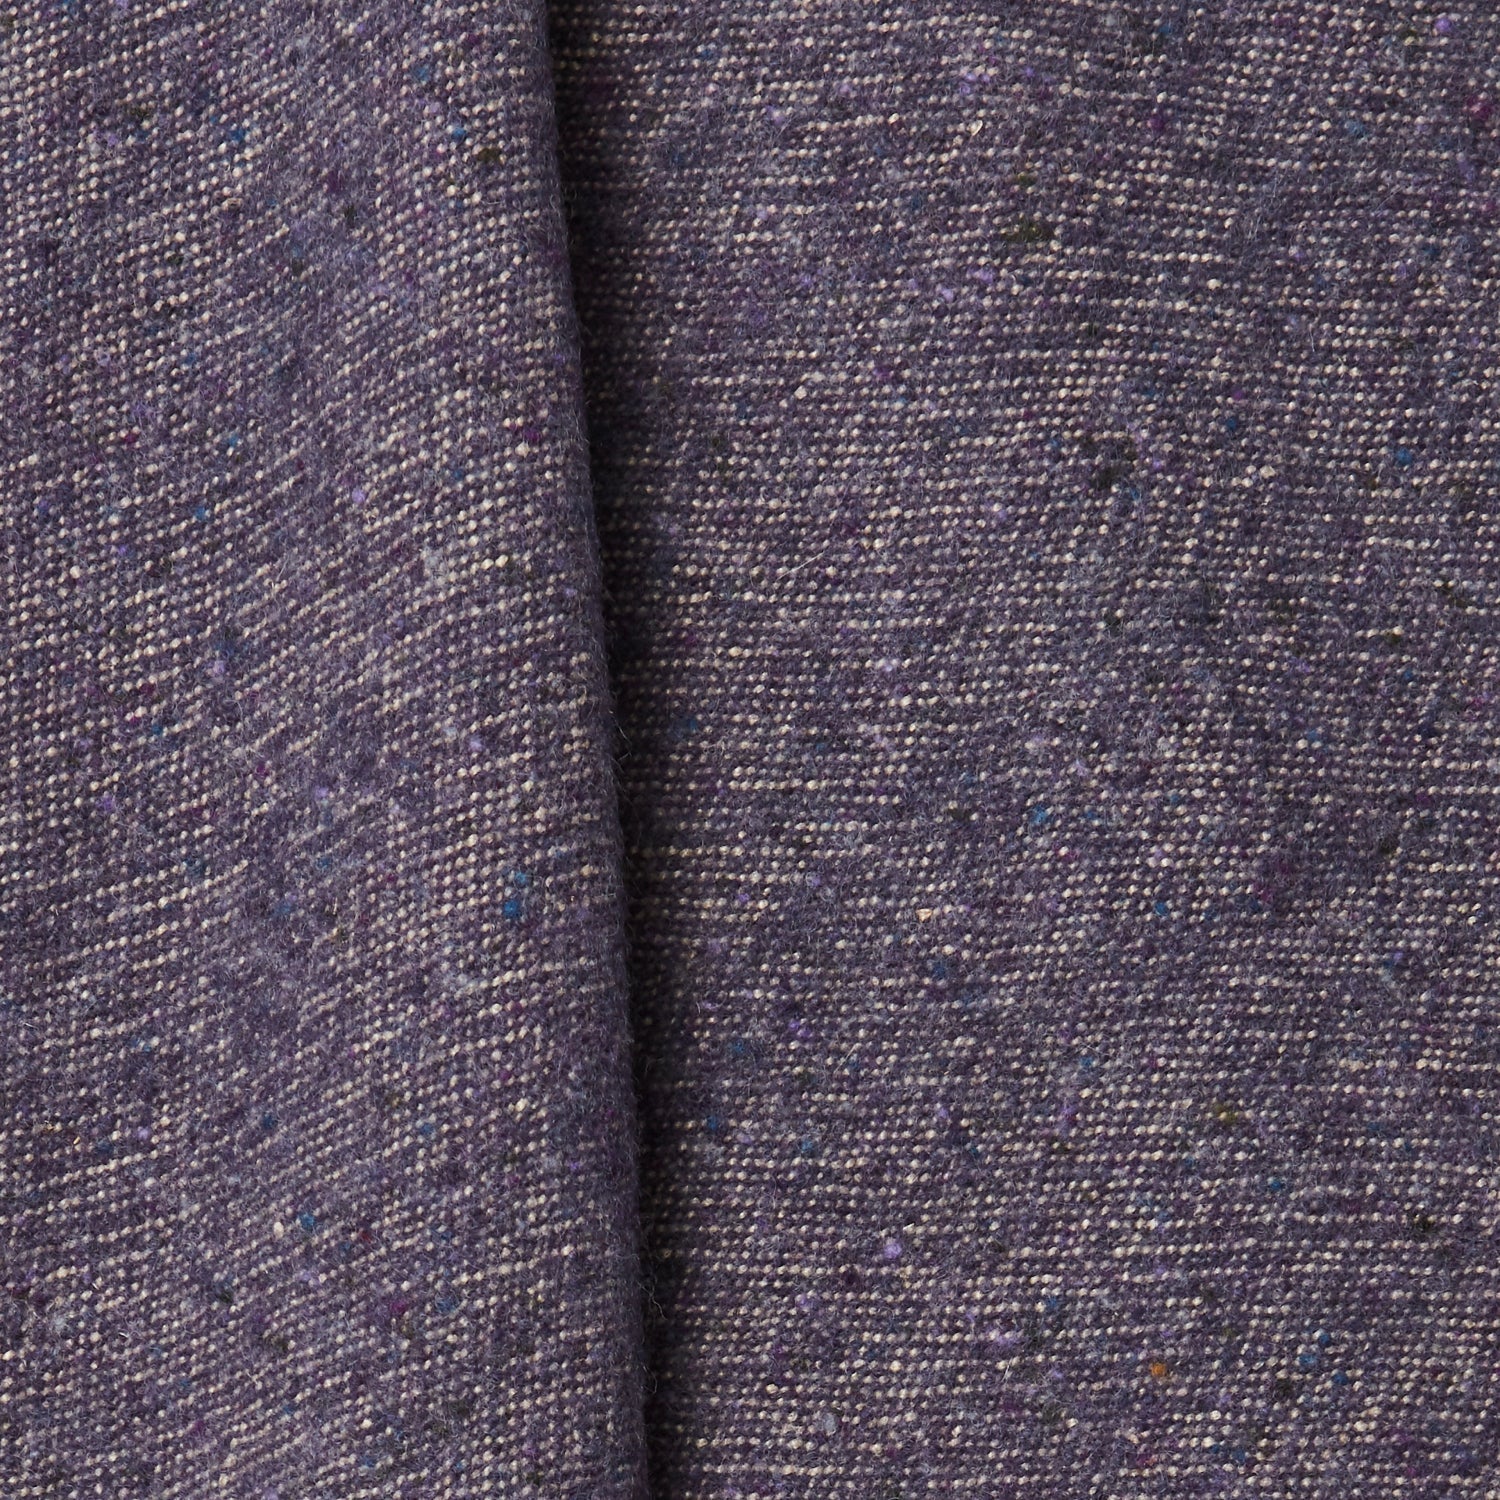 A draped swatch of blended linen-wool mix fabric in a flecked purple color.